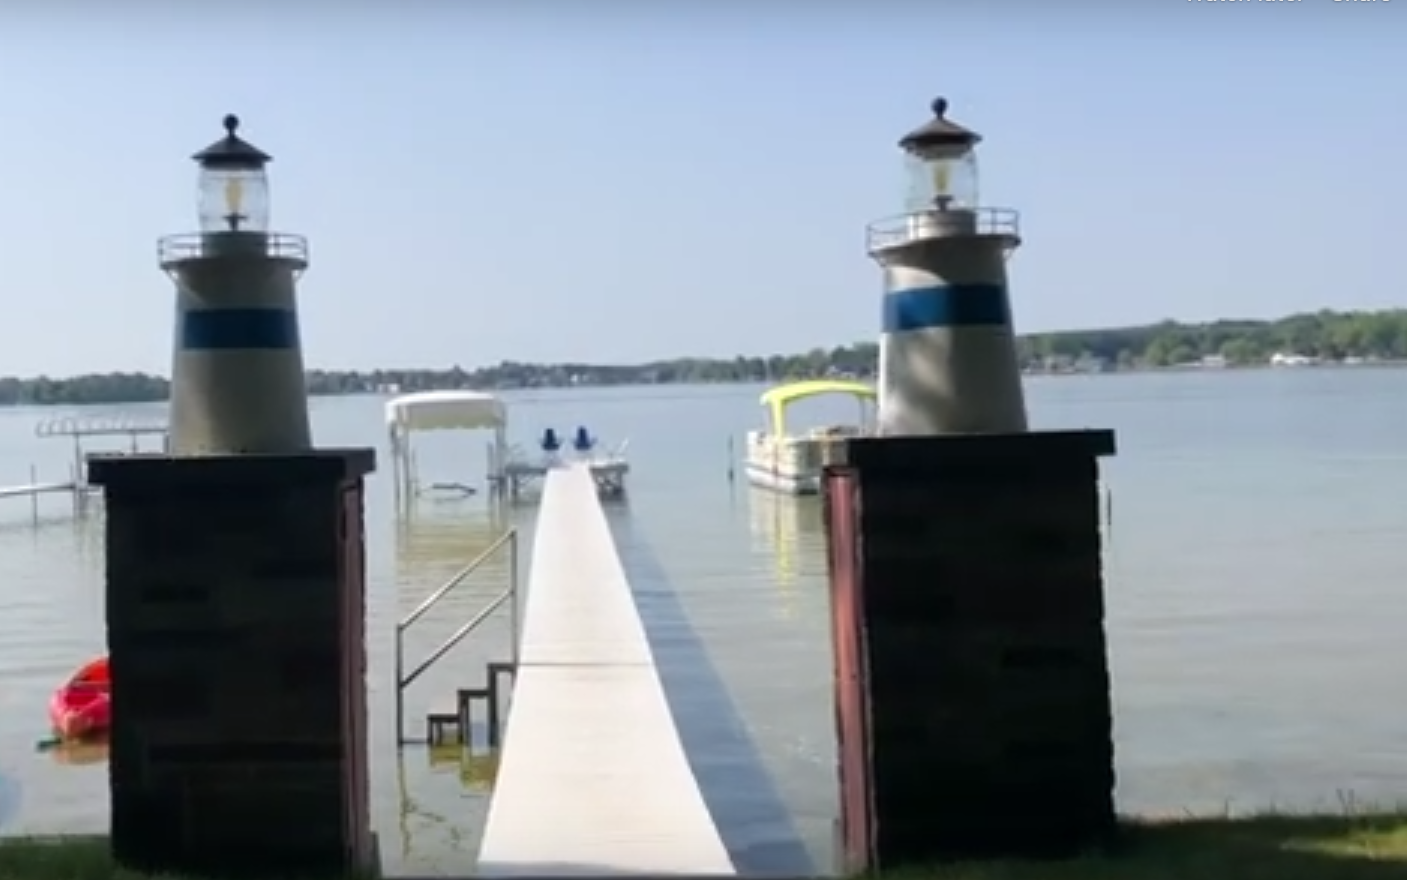 clear lake yacht club fremont indiana